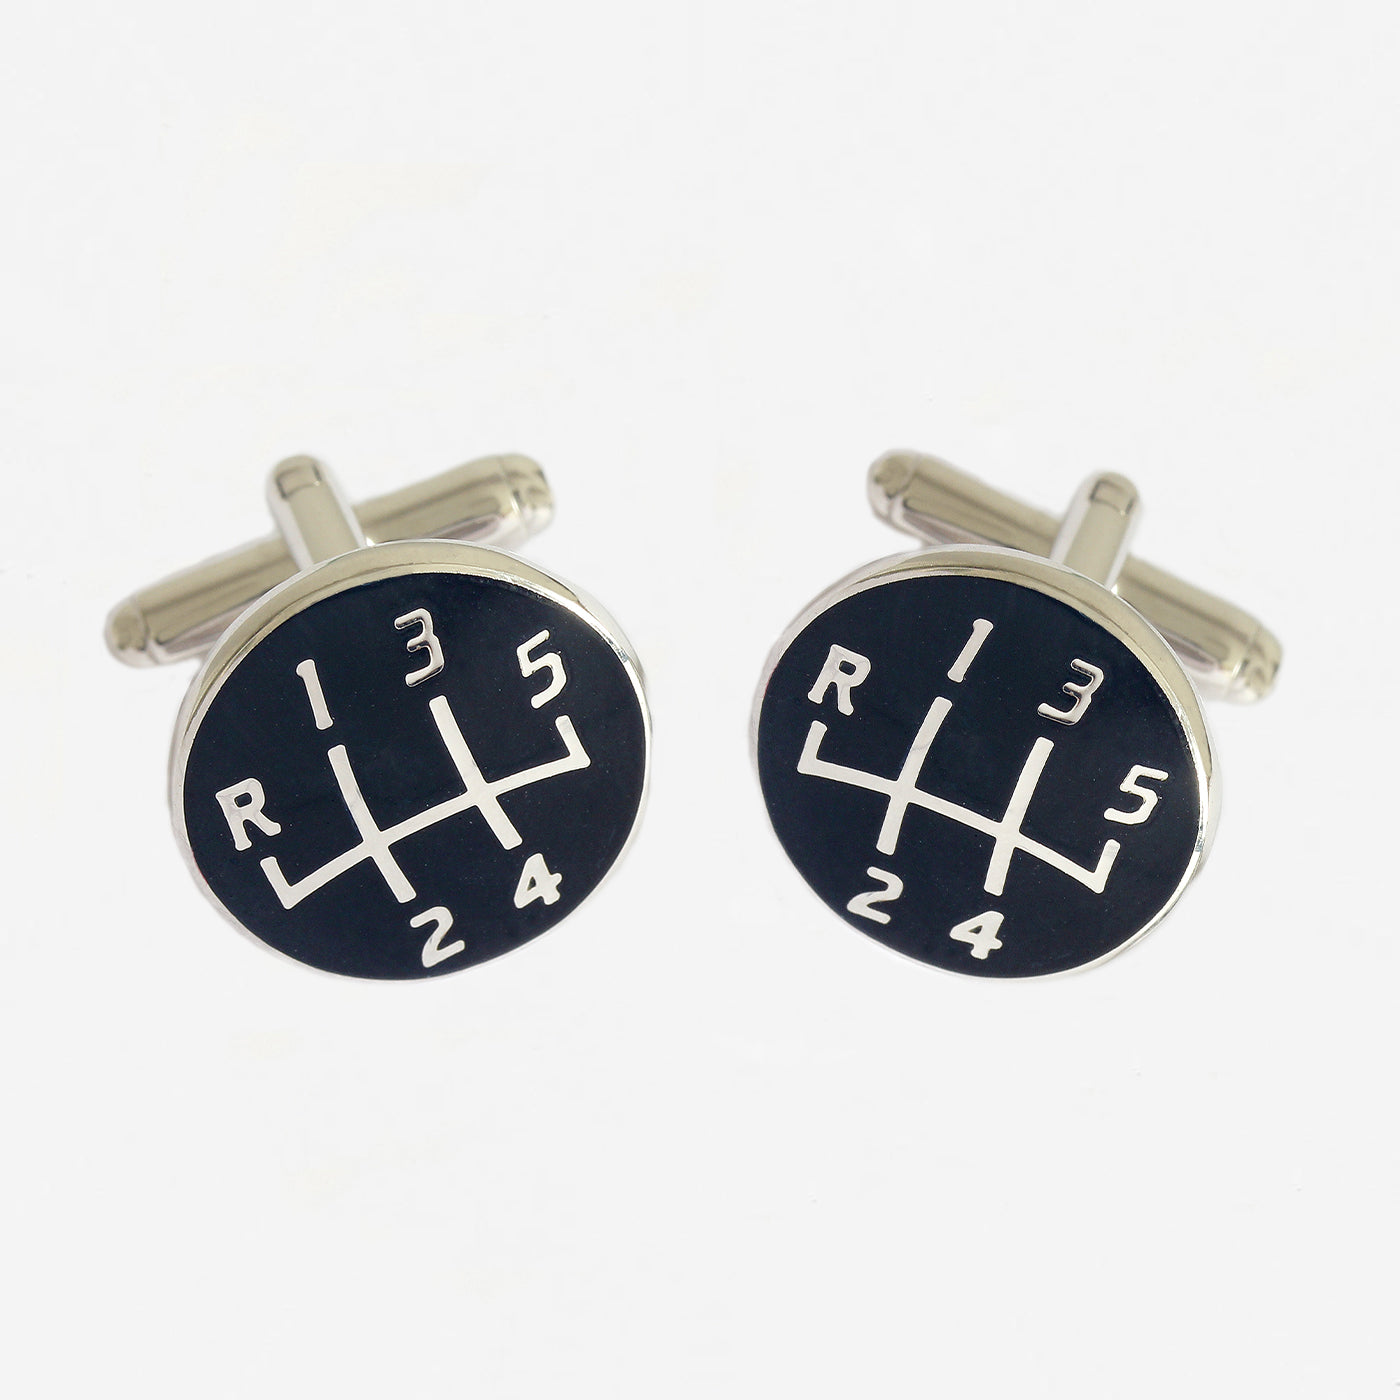 a pair of silver plate gearbox design cufflinks with bar connectors